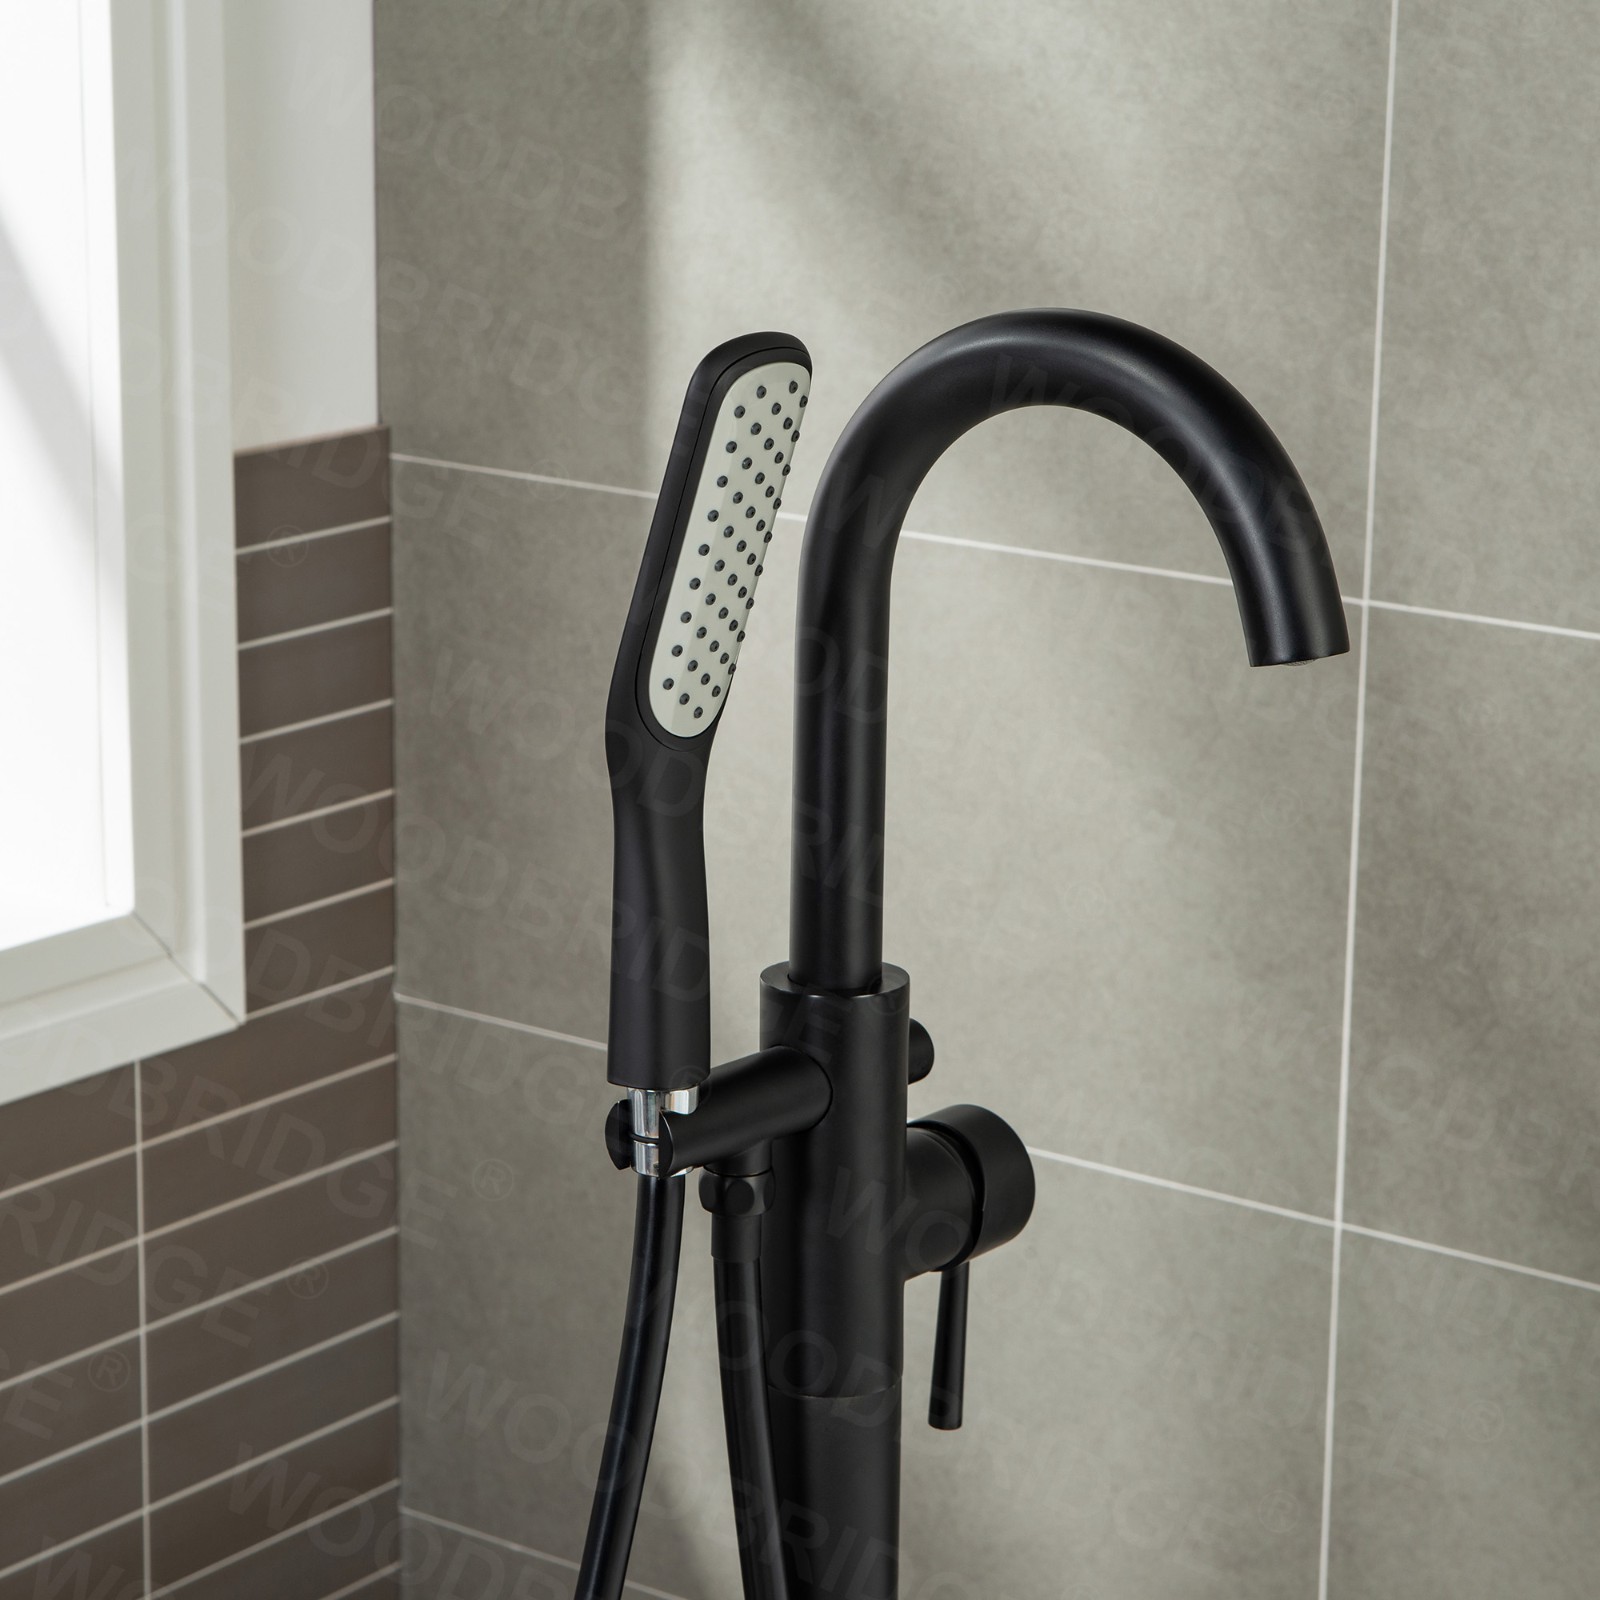  WOODBRIDGE F0025MBSQ Fusion Single Handle Floor Mount Freestanding Tub Filler Faucet with Square Comfort Grip Hand Shower in Matte Black Finish._5272